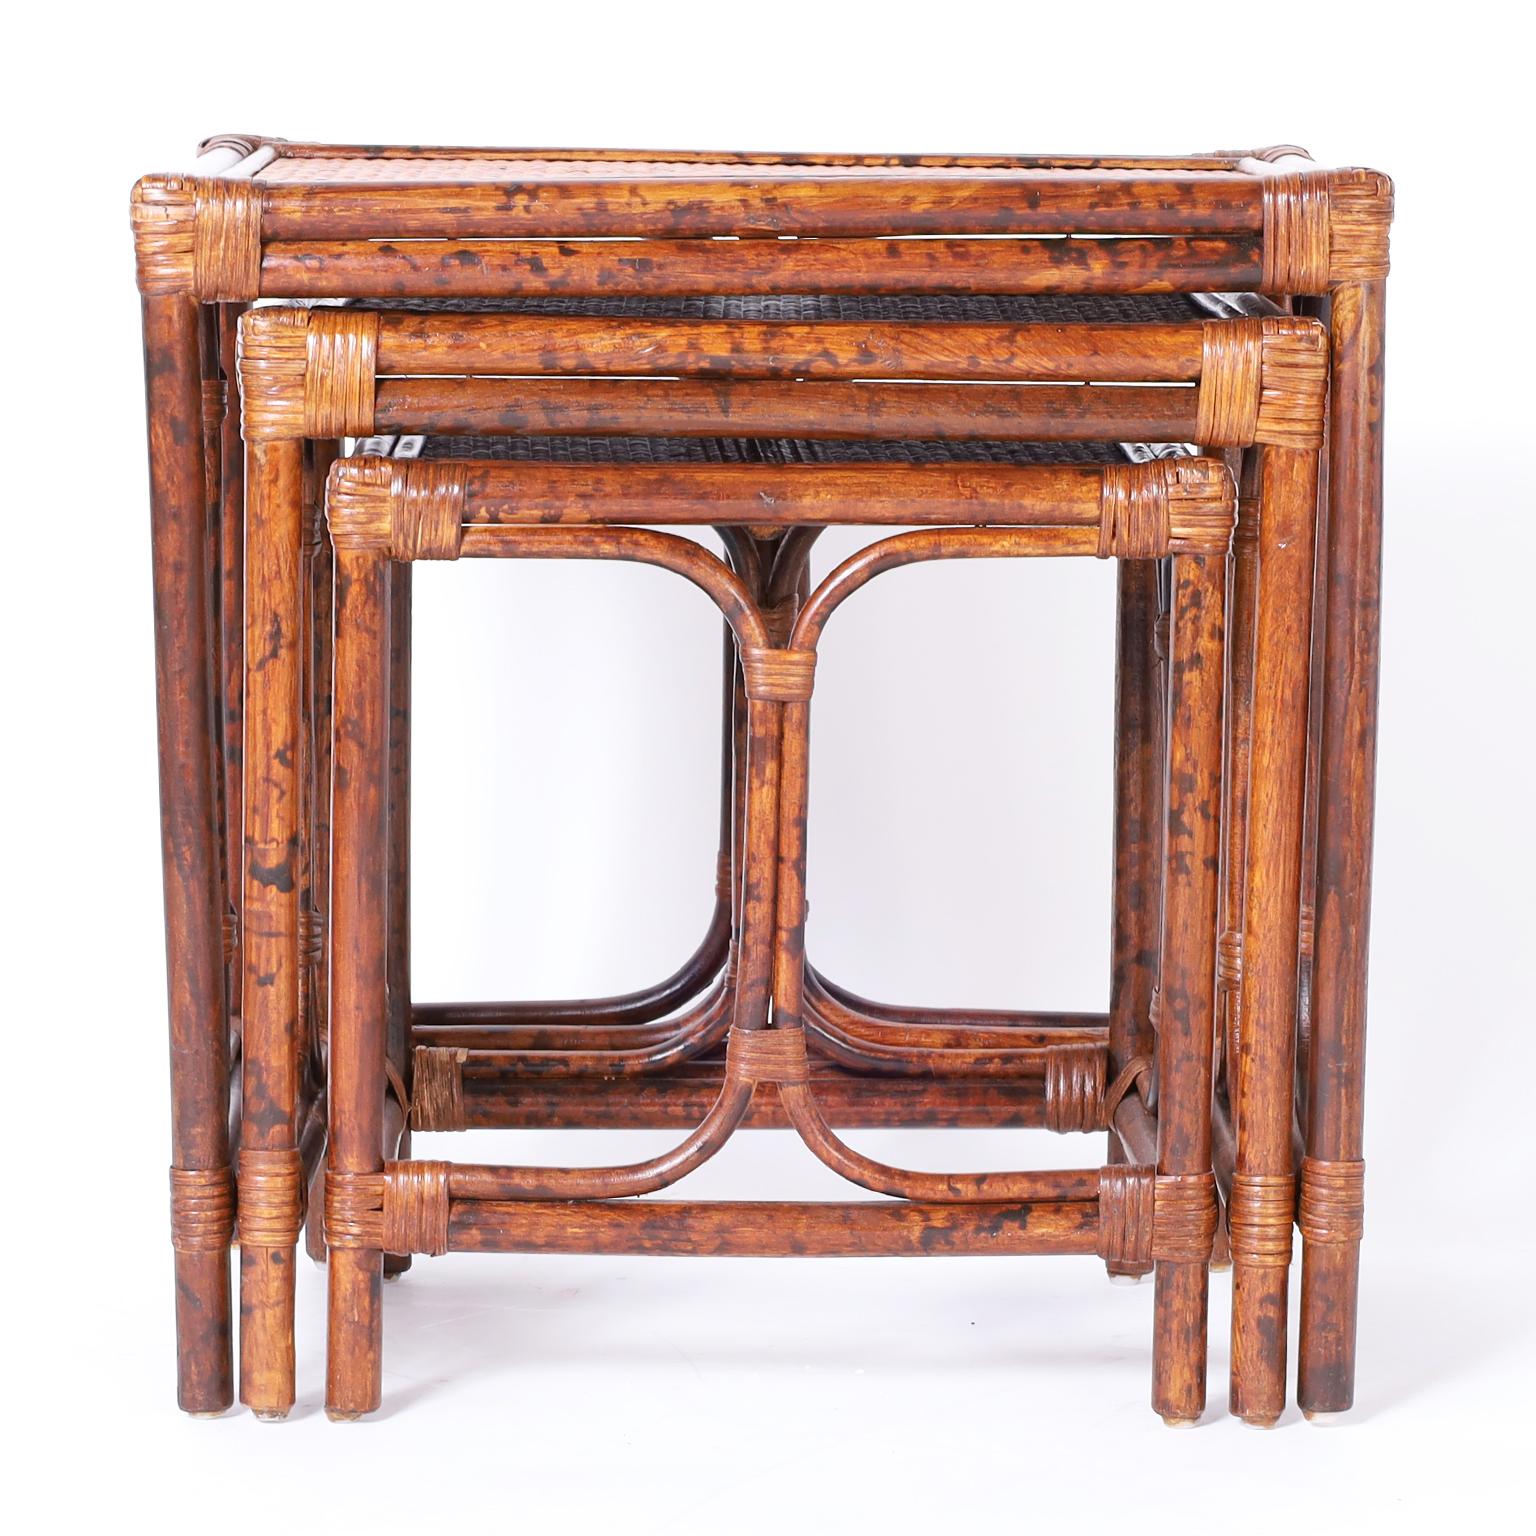 British colonial style nest of three tables with faux burnt bamboo frames wrapped with reed and grasscloth panels at the top.

Largest to smallest:

H: 22.5 W: 22 D: 16.5
H: 20 W: 18.5 D: 15
H: 17.5 W: 16 D: 13.5.